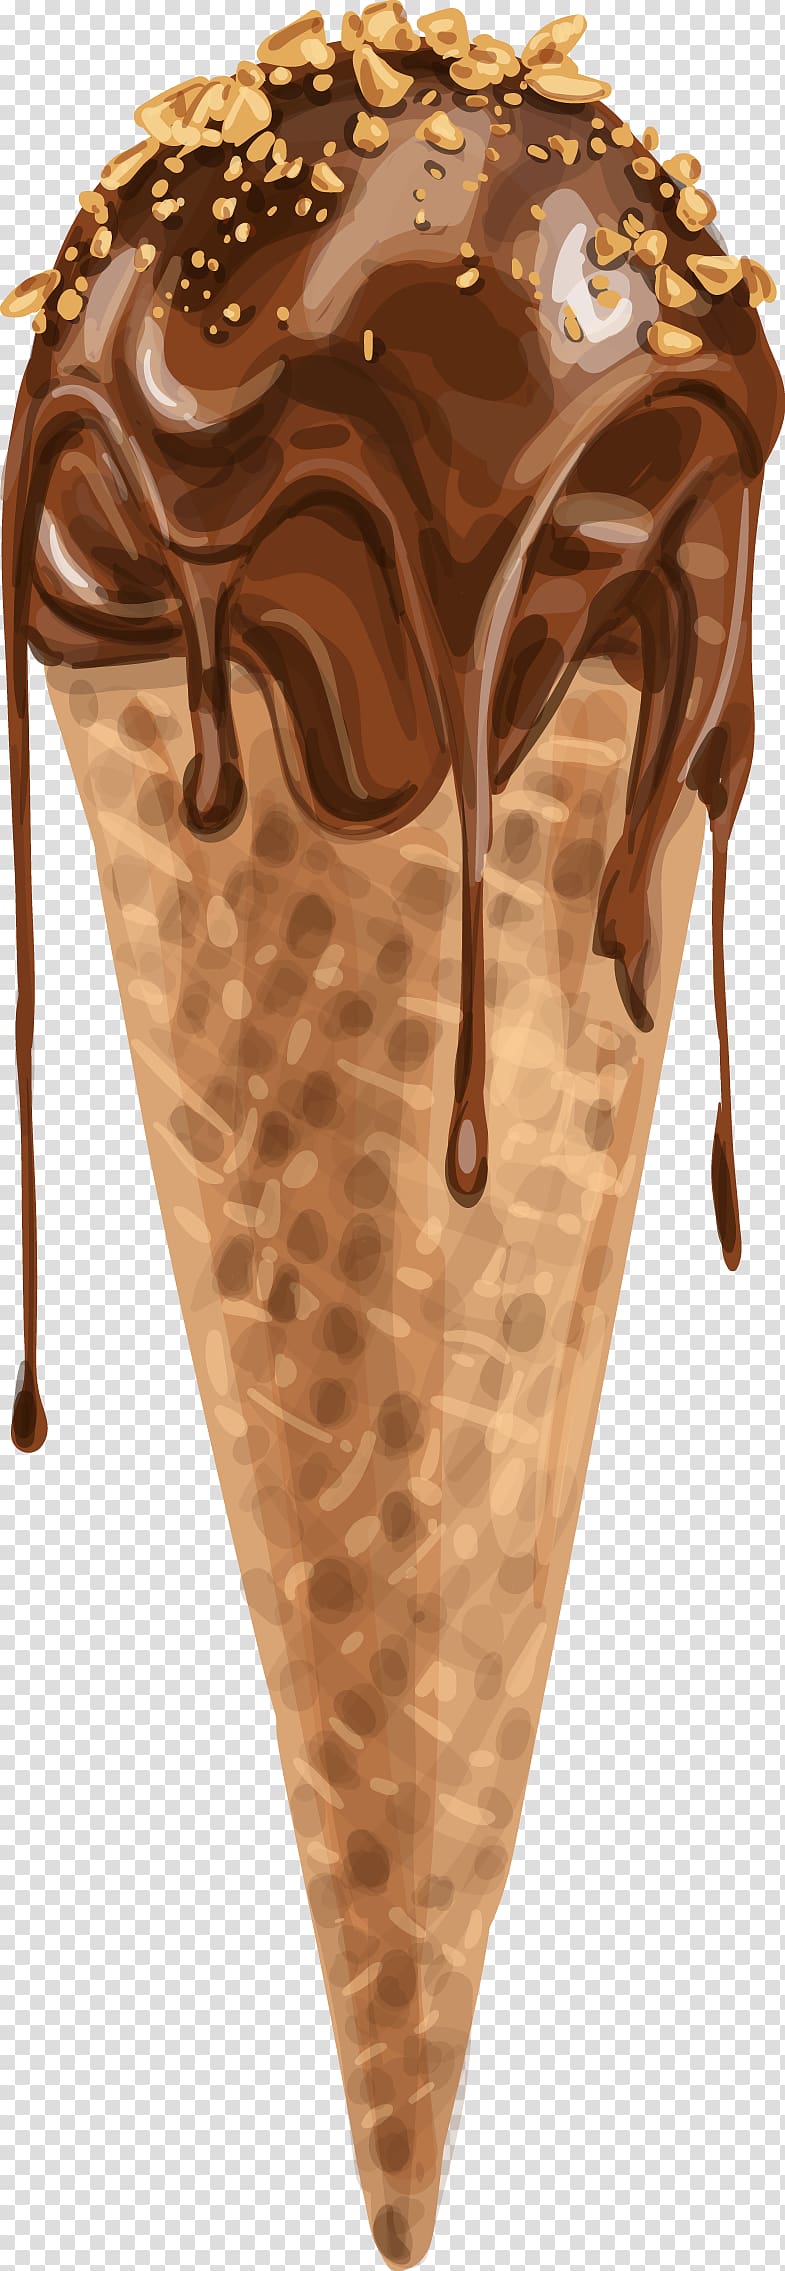 Ice cream Ice pop Doughnut, hand painted chocolate cone transparent background PNG clipart